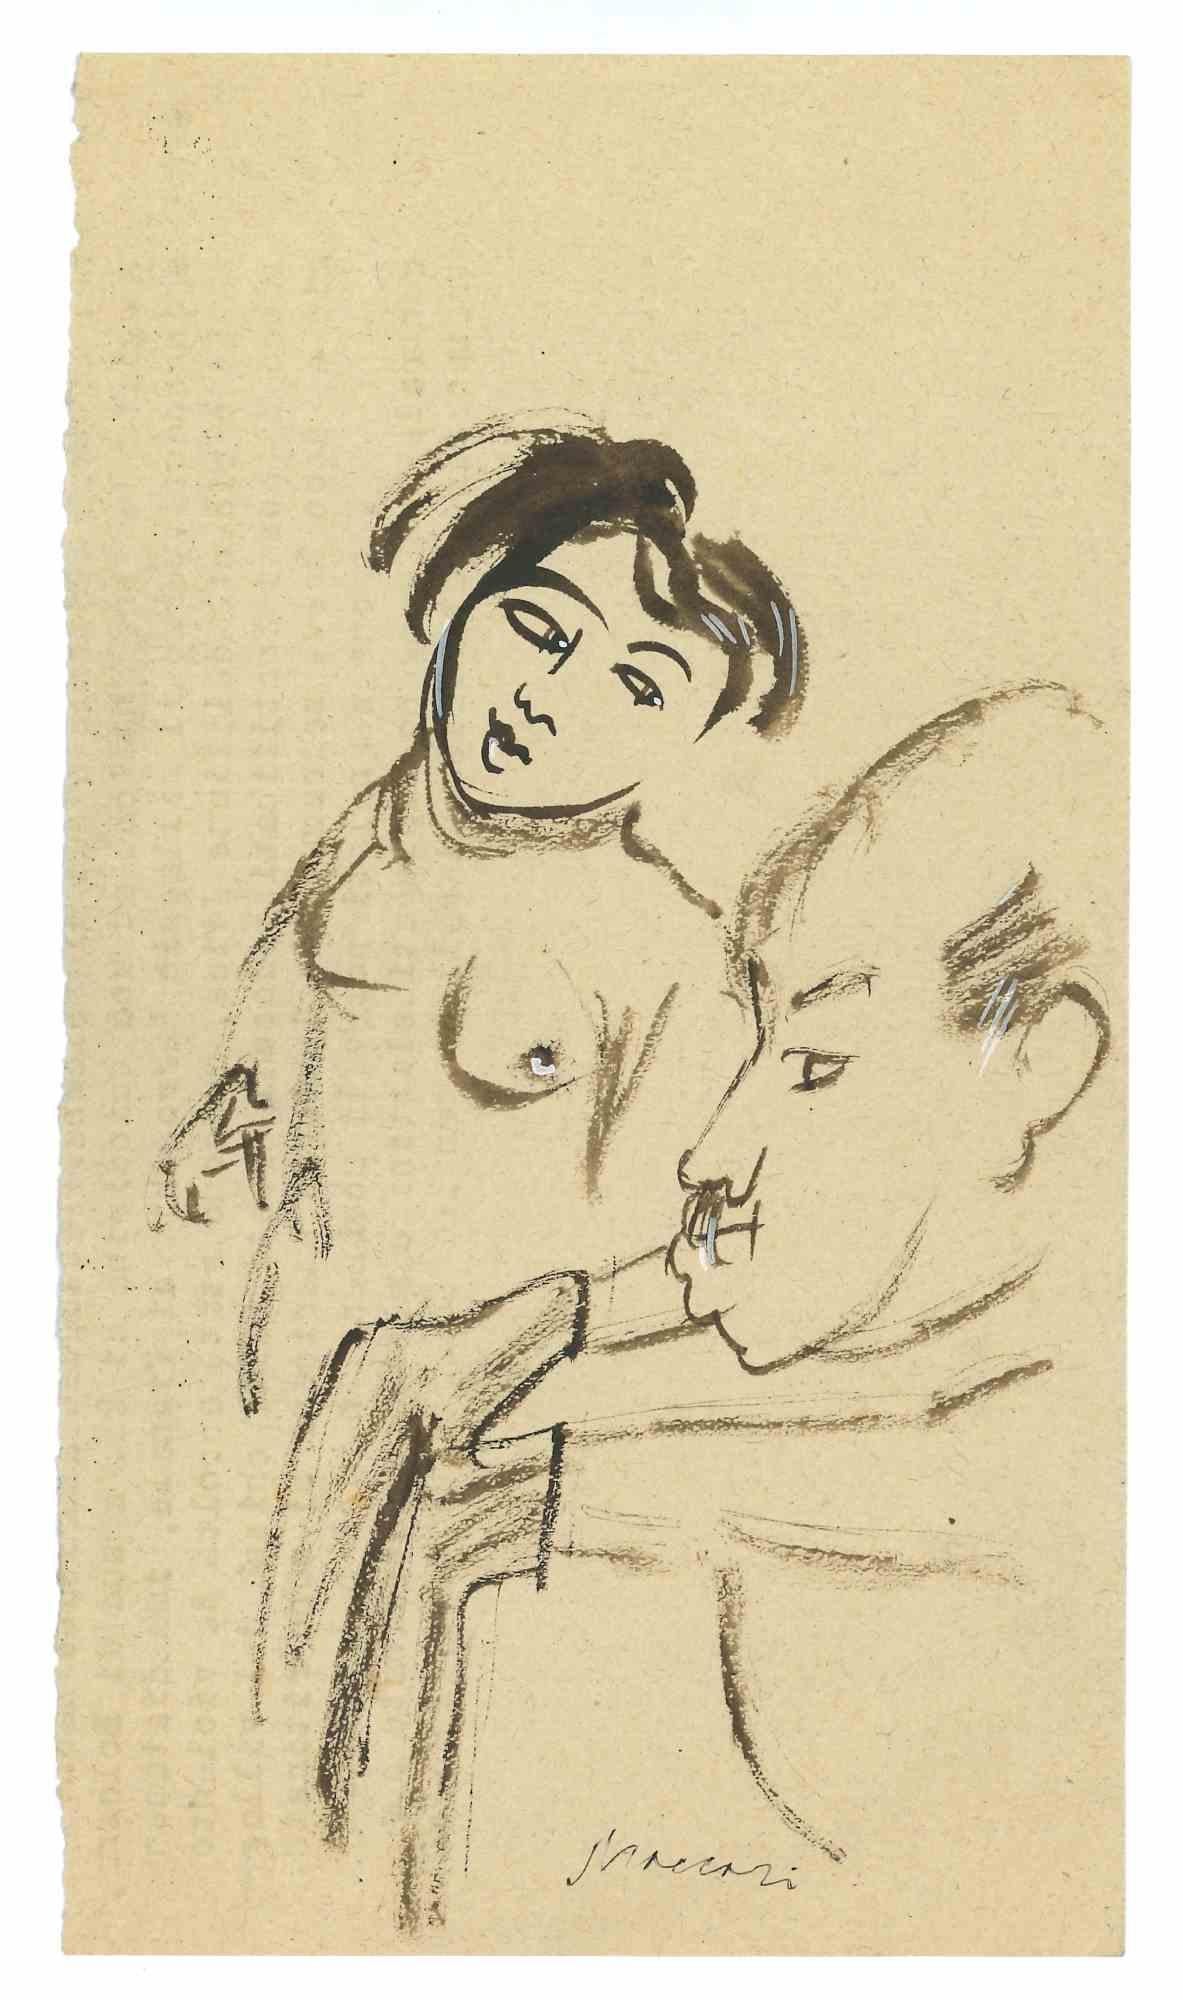 The Nude and Elderly is an Original Drawing in China ink on cream-colored paper realized by Mino Maccari in the mid-20th century.

Hand-signed by the artist on the lower.

Good conditions.

Mino Maccari (1898-1989) was an Italian writer, painter,